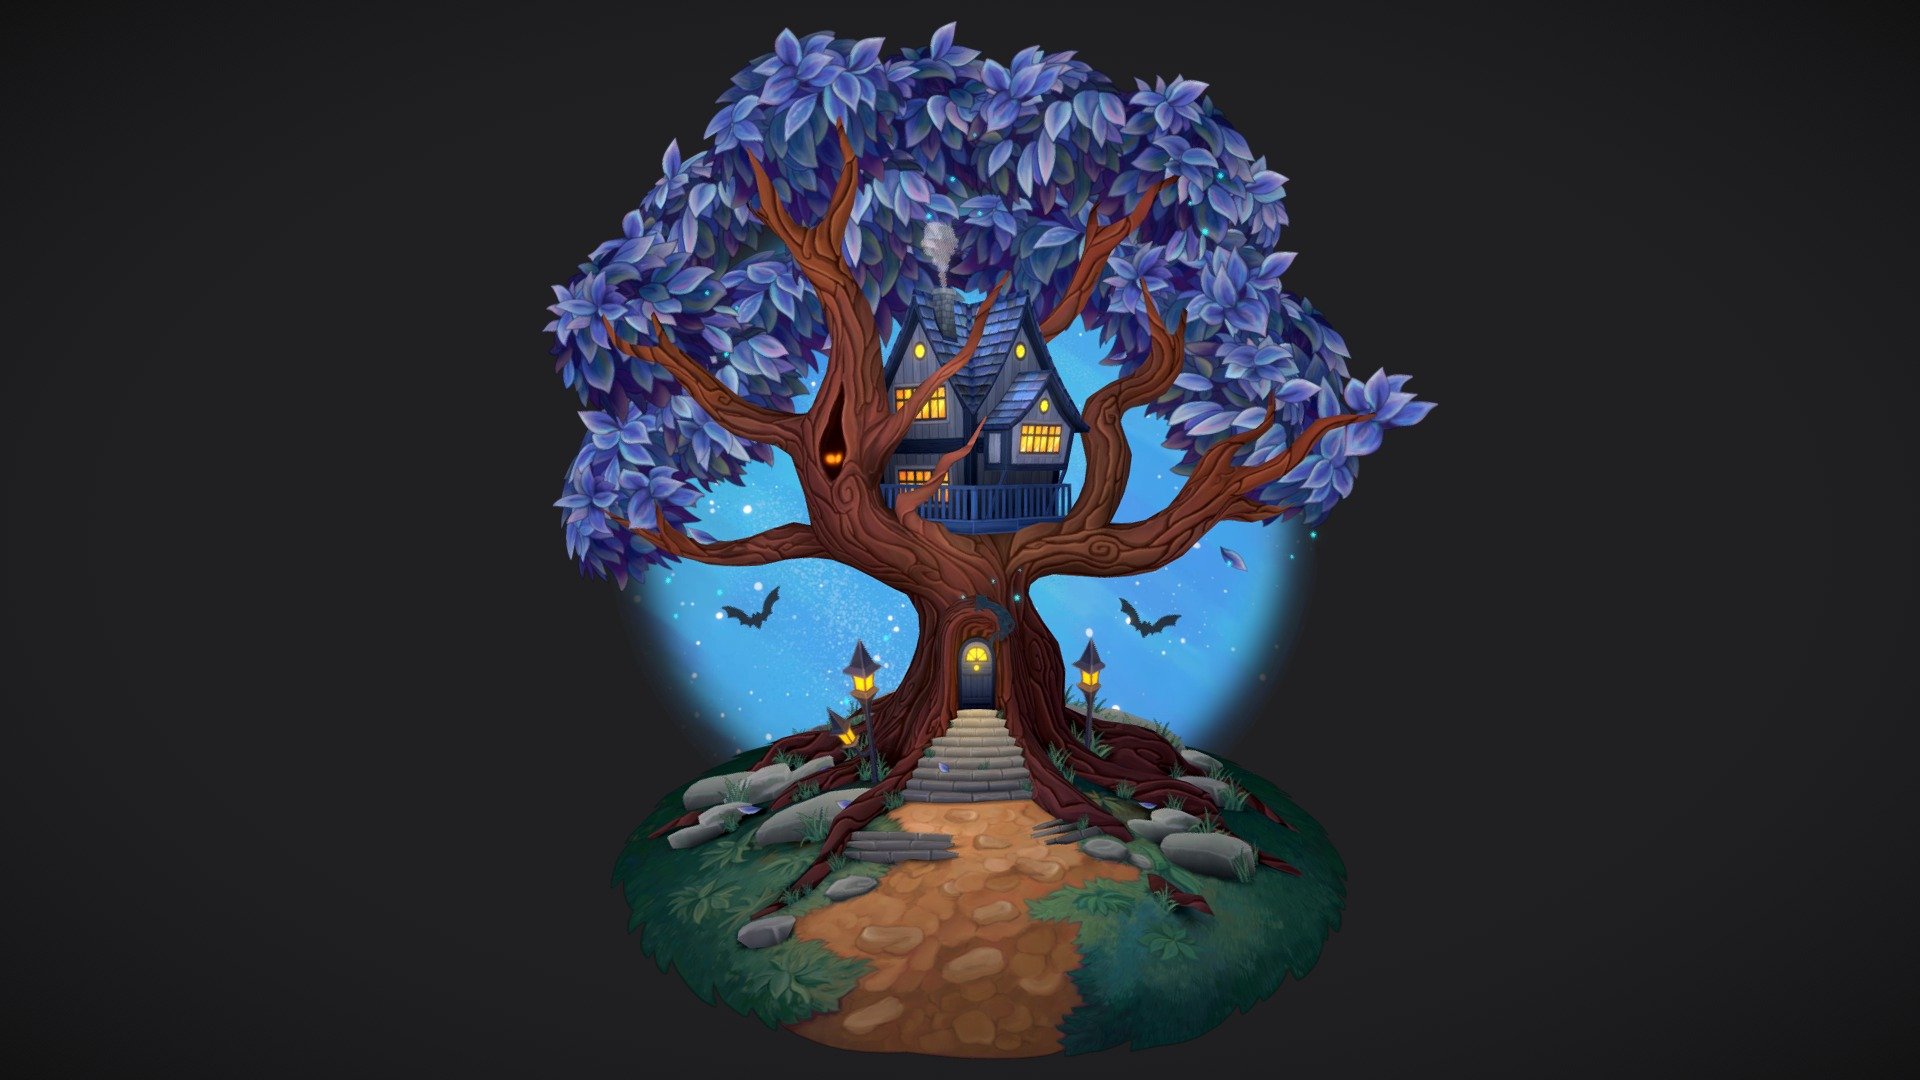 Finished 🥳
I had to reload it to add animation. Also I've finalized textures. 
The previous version is here.

This is for Asheligh Warner’s CGMA Creating Stylized Game Assets for Winter 2023. 
Week 2: 2.5 Handpainted Stylized Tree. 

It’s designed to be viewed from a limited camera angle 3d model